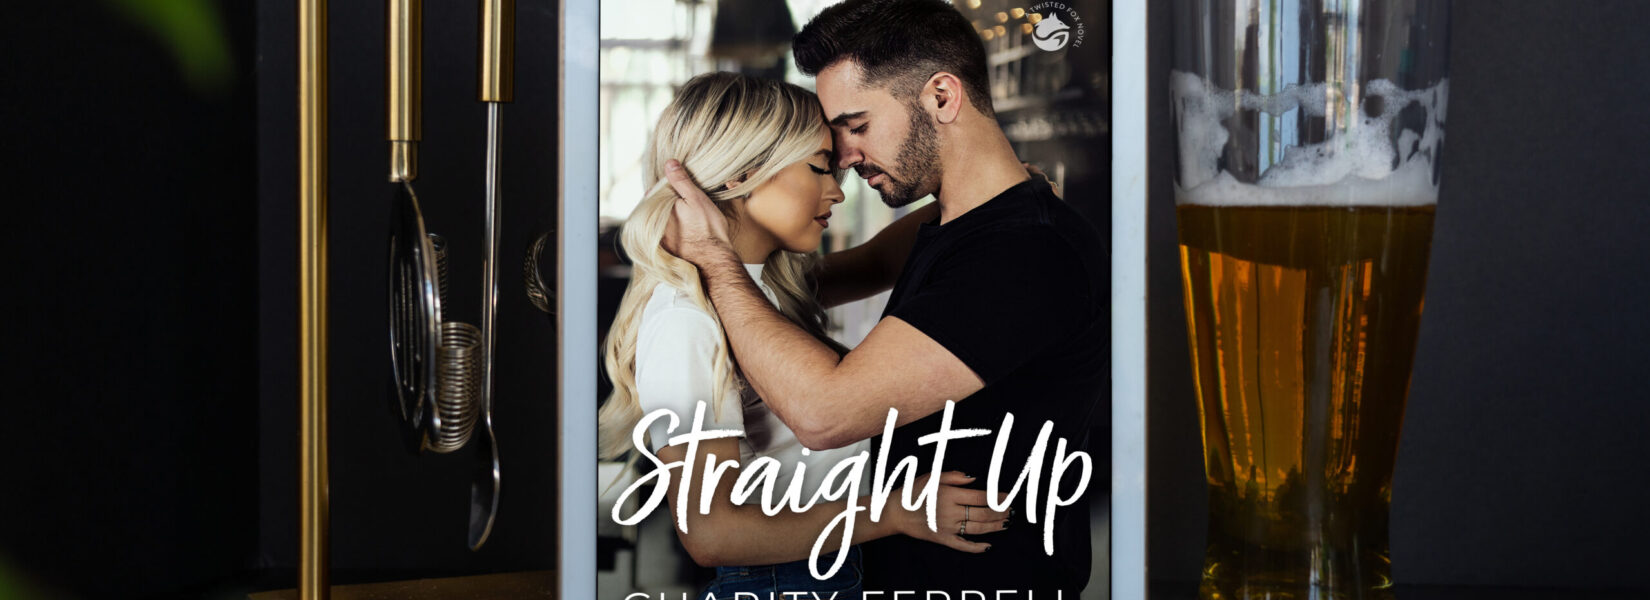 Straight Up is now available!